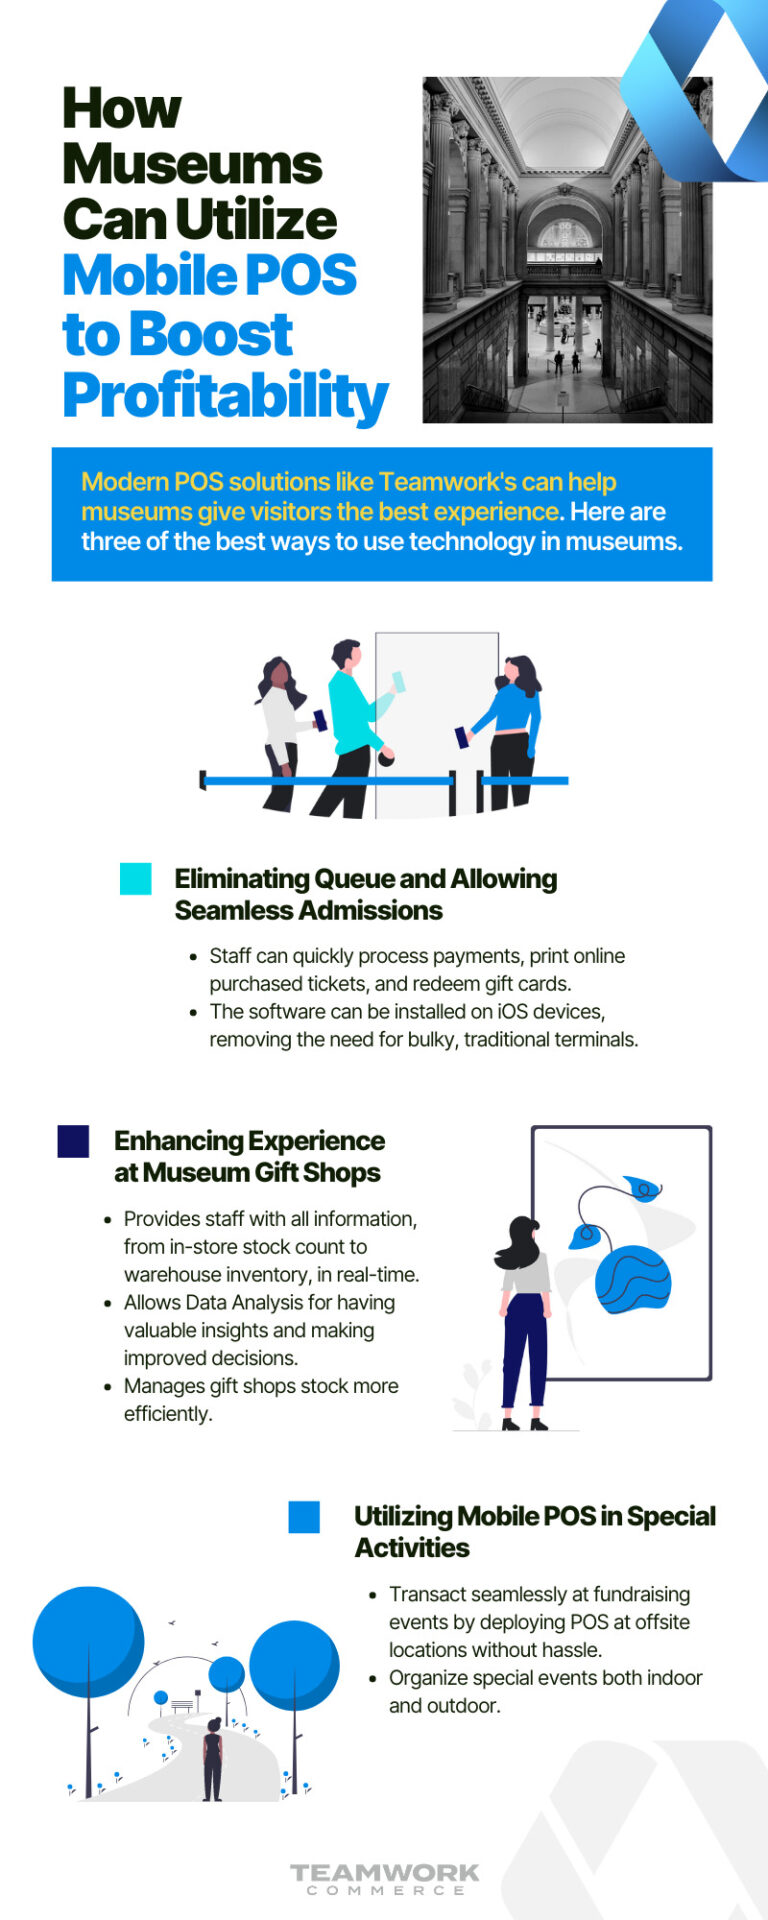 3 Ways How Museums Can Utilize Mobile POS to Boost Profitability